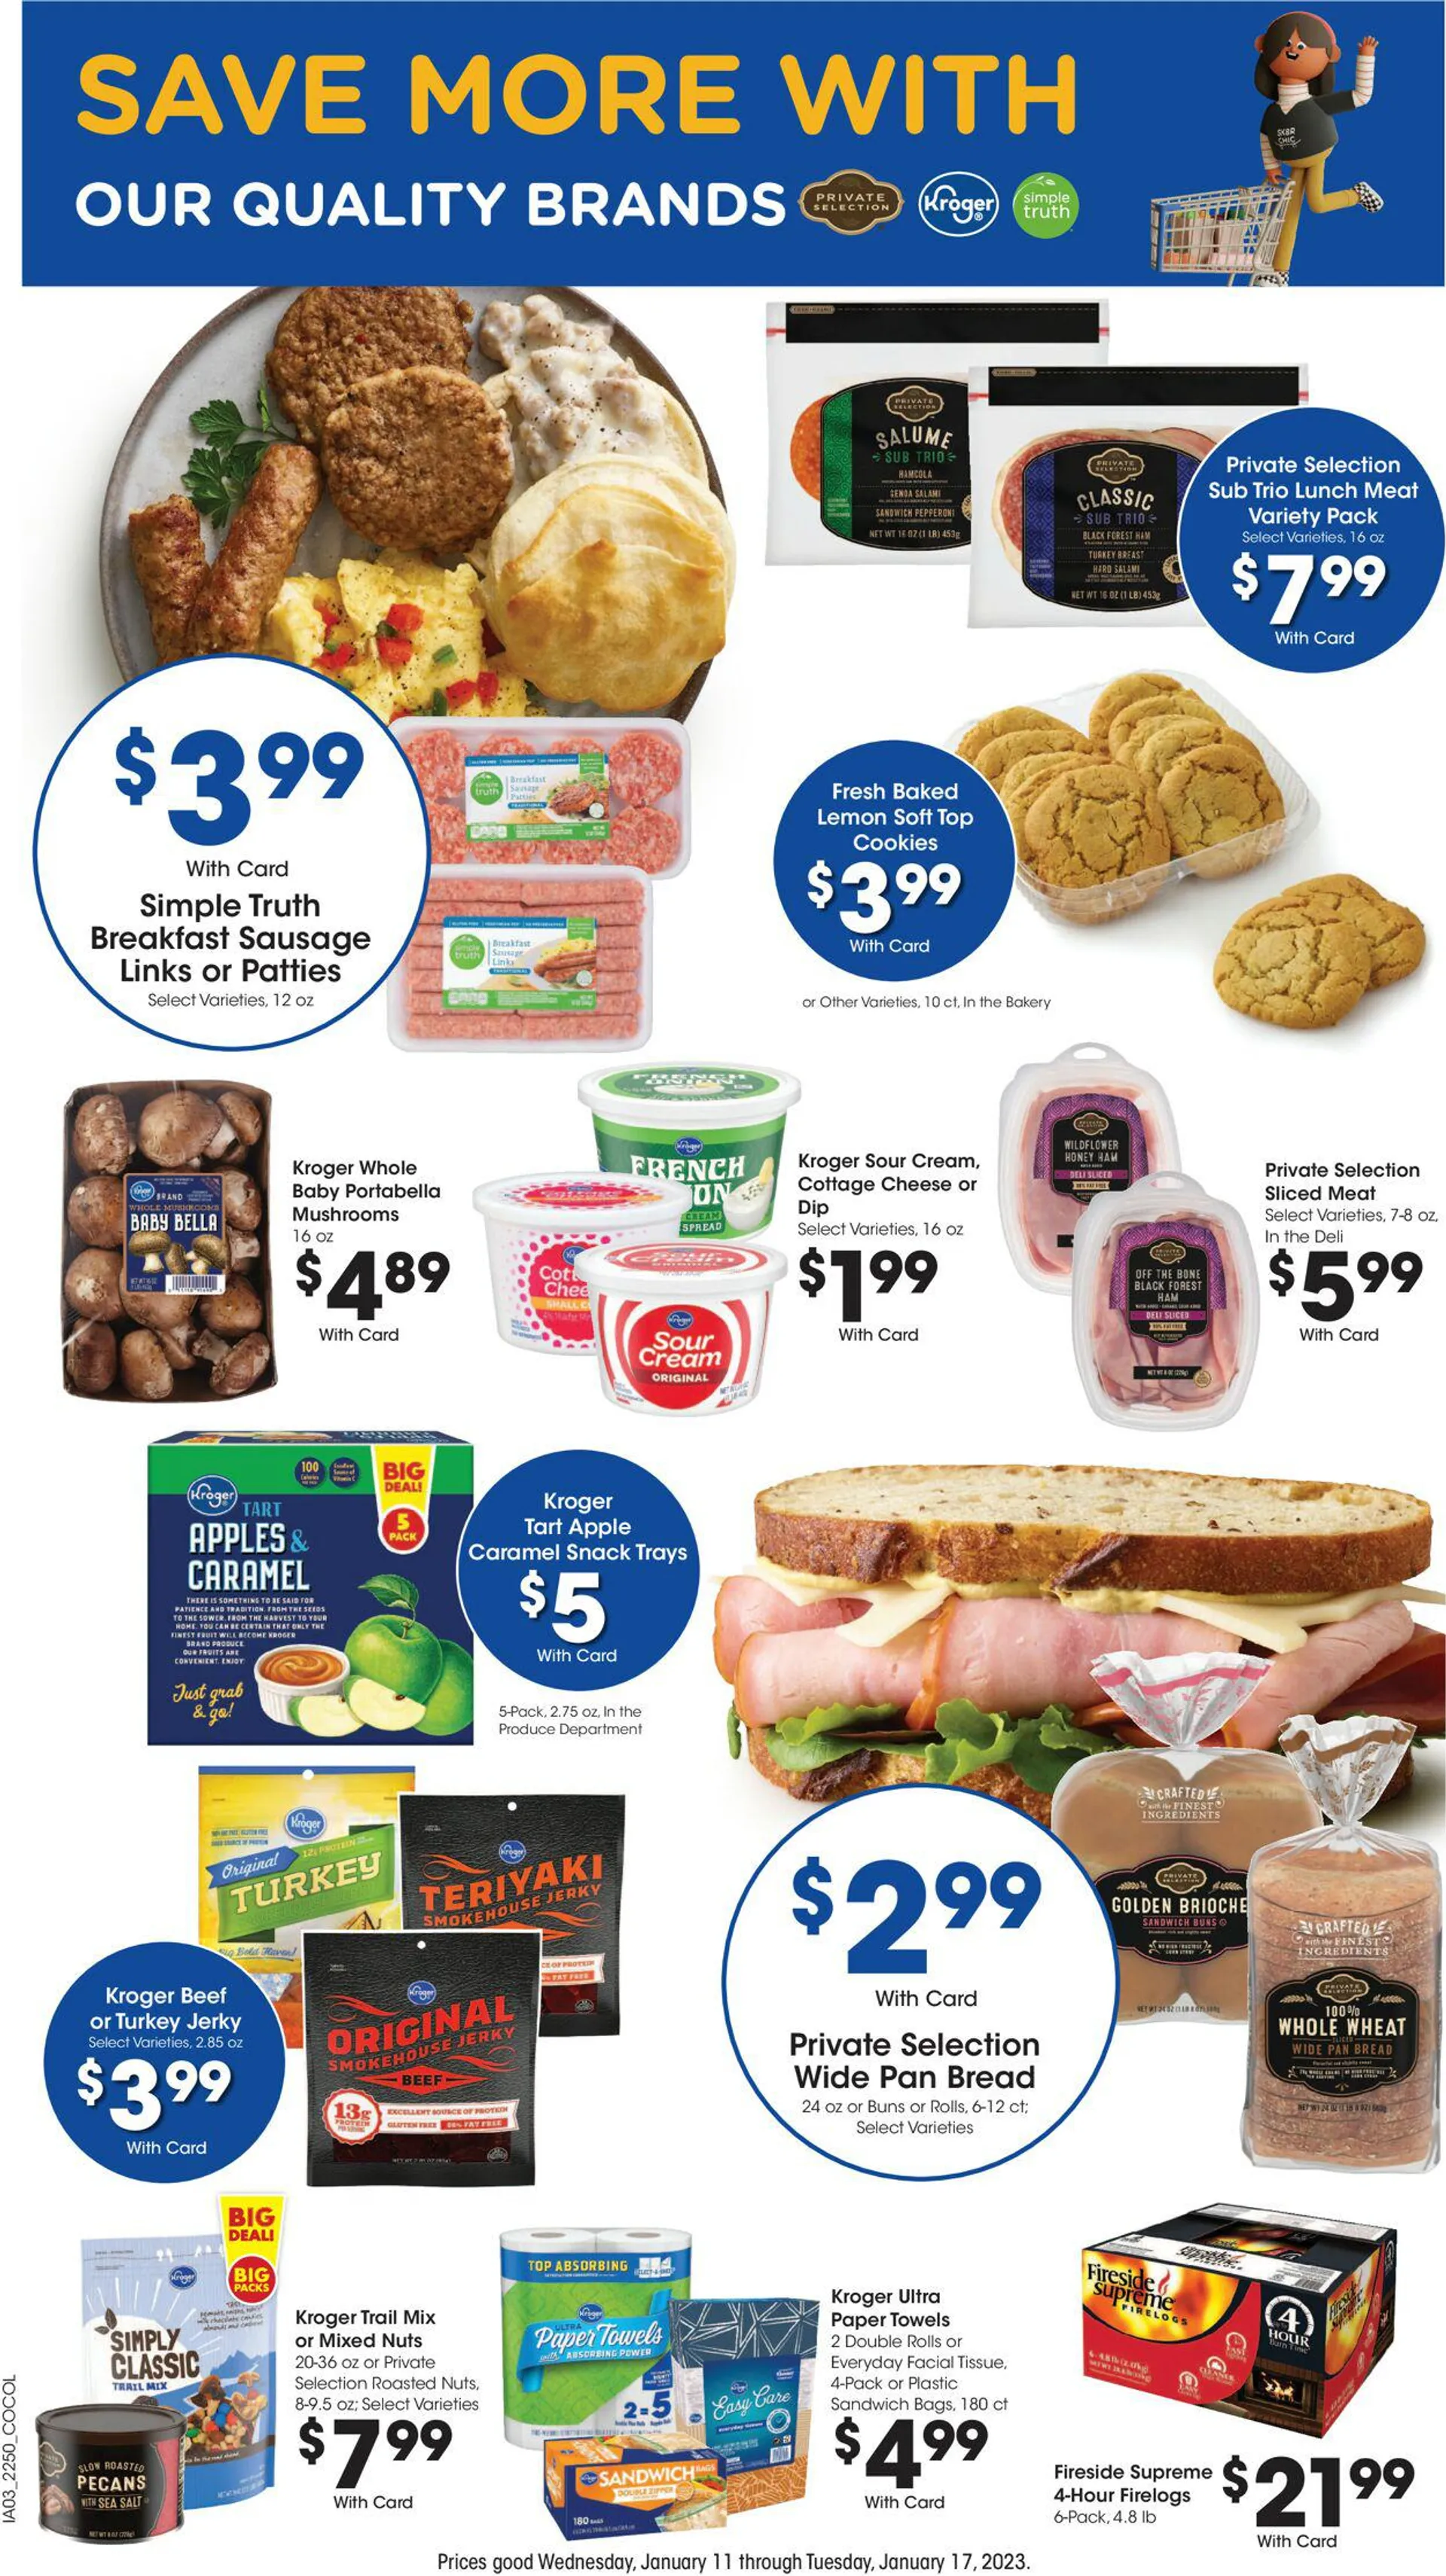 Kroger Current weekly ad - 11